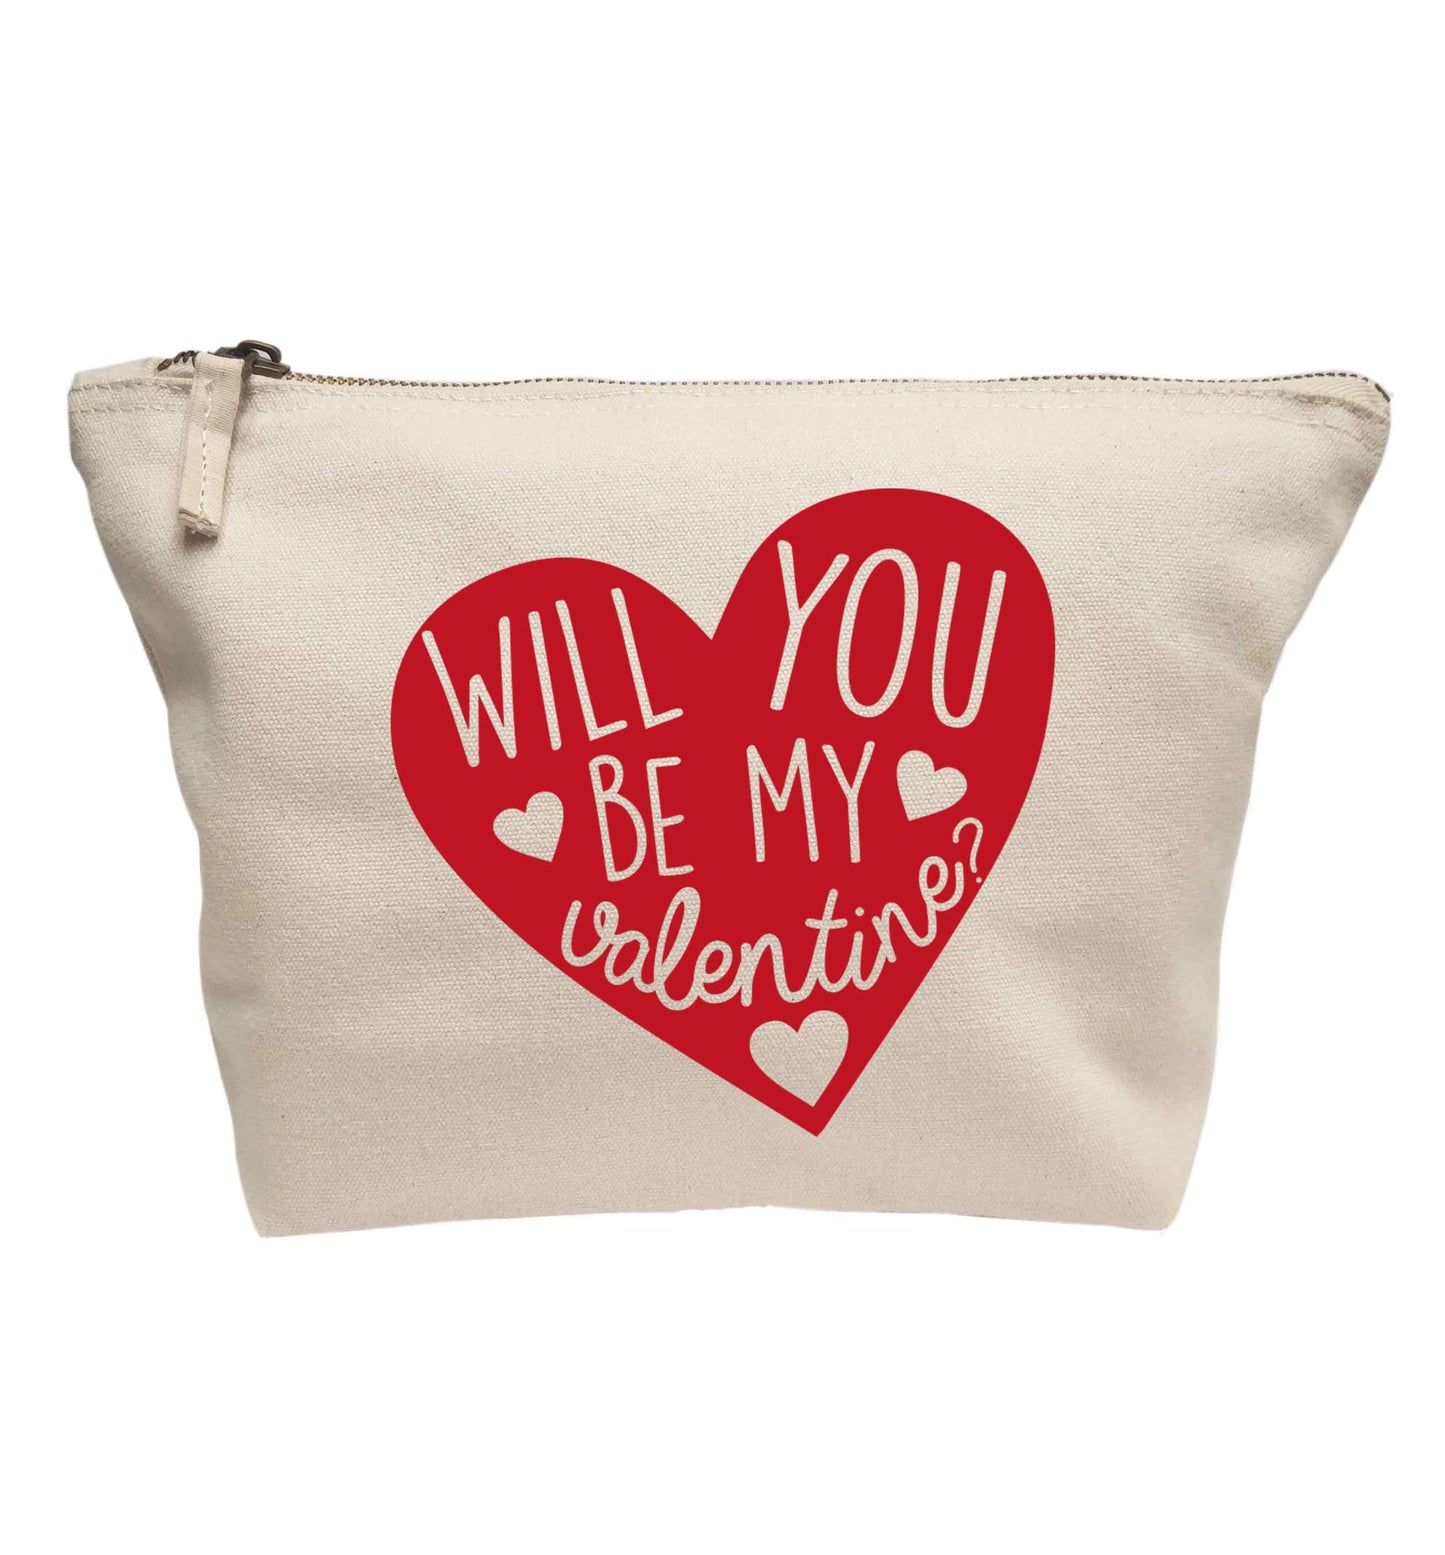 Will you be my valentine? | Makeup / wash bag